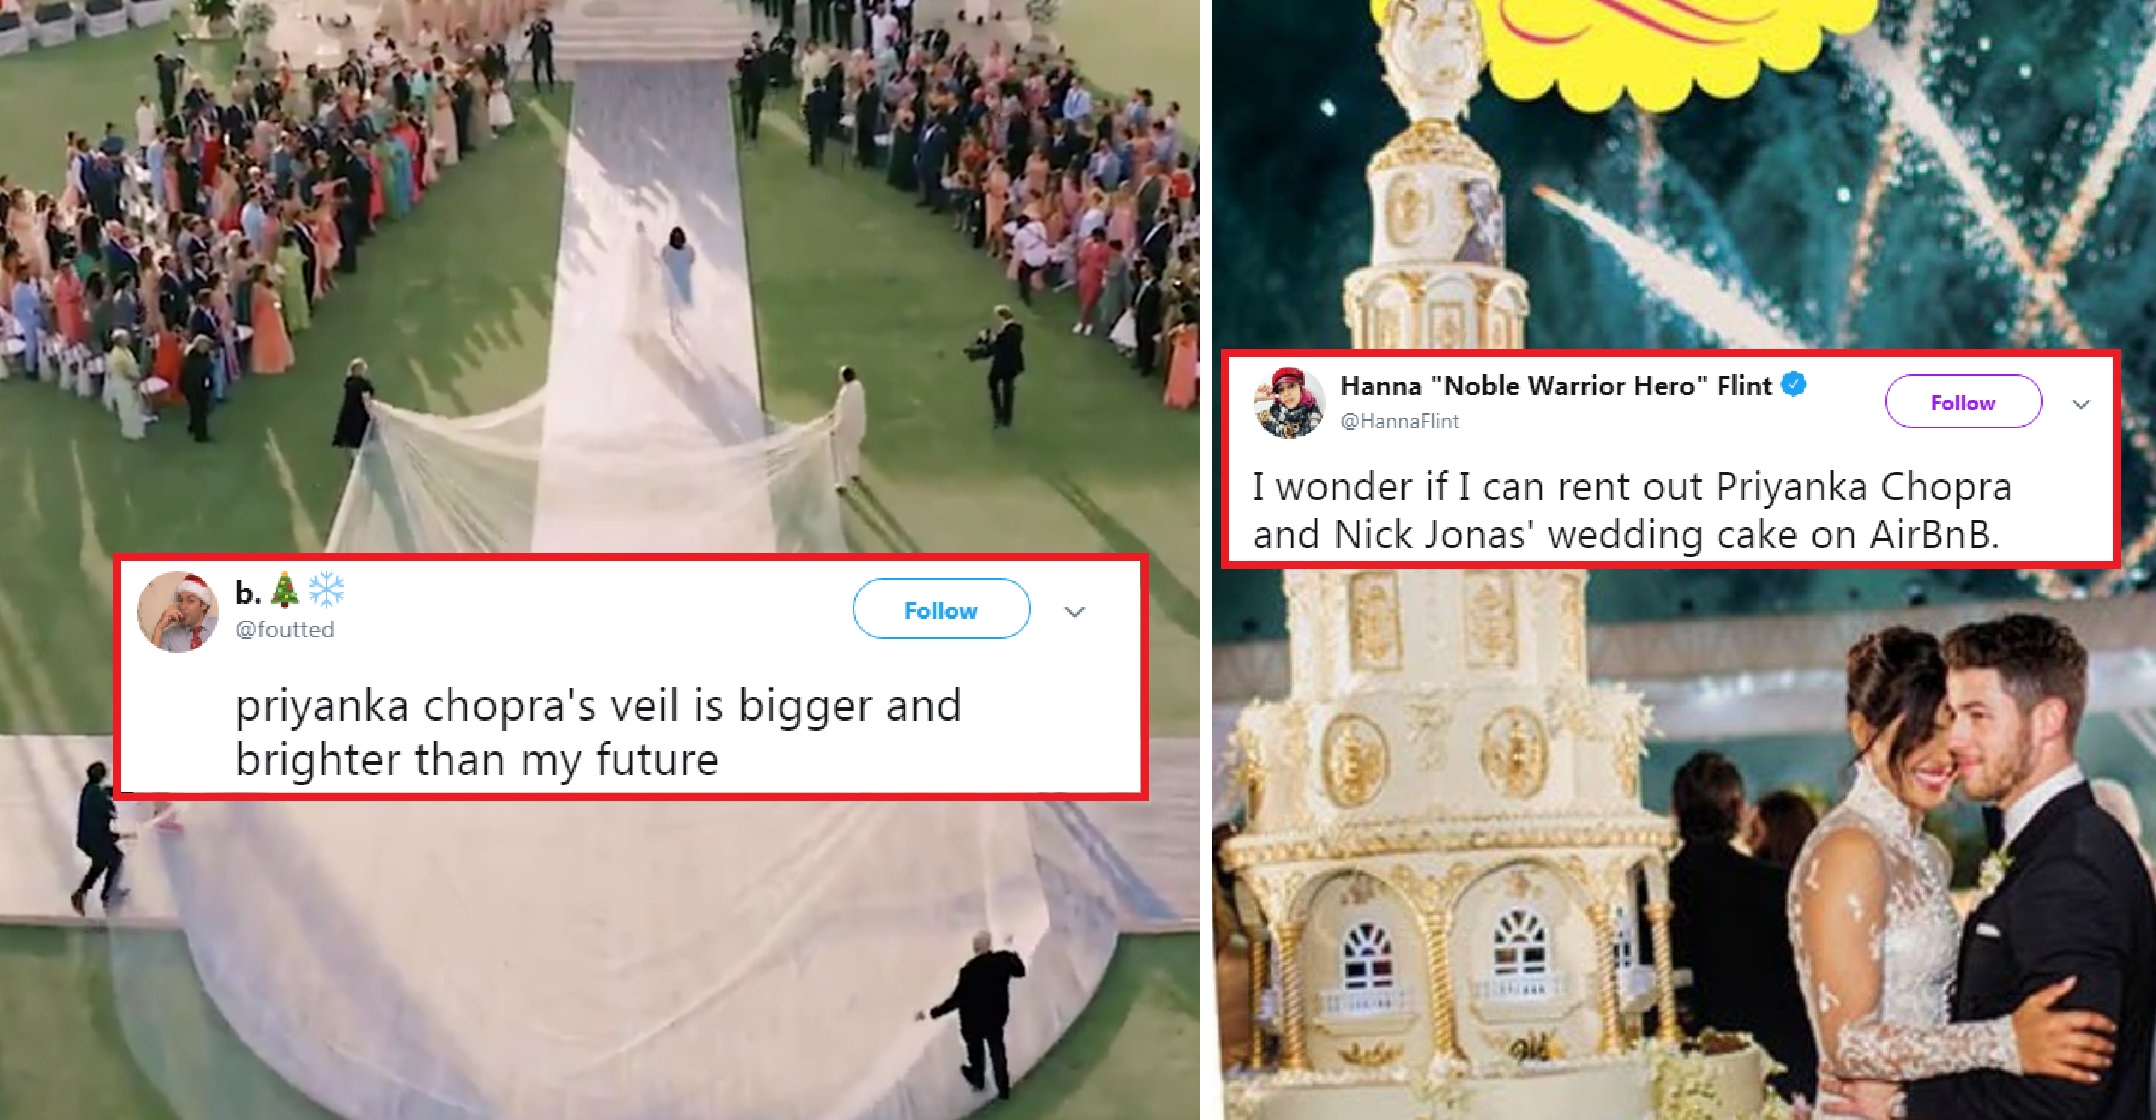 From 75 Ft Long Veil To 18 Foot Cake: Priyanka’s Wedding Results Into Hilarious Memes On Twitter!